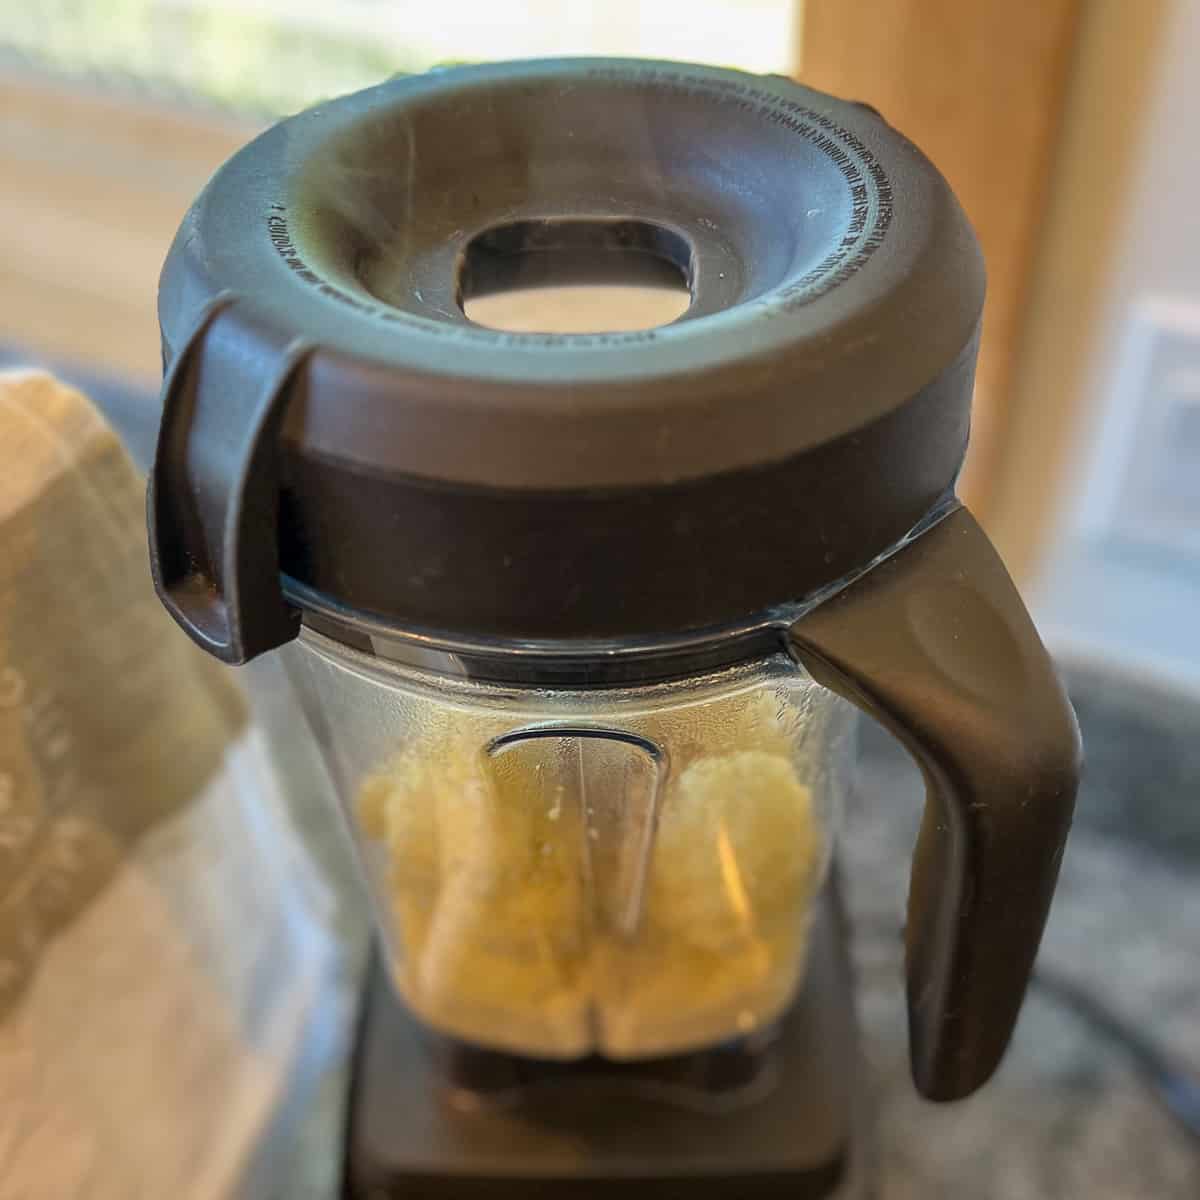 top side view of a blender with hot cauliflower in and steam coming out of the vented lid